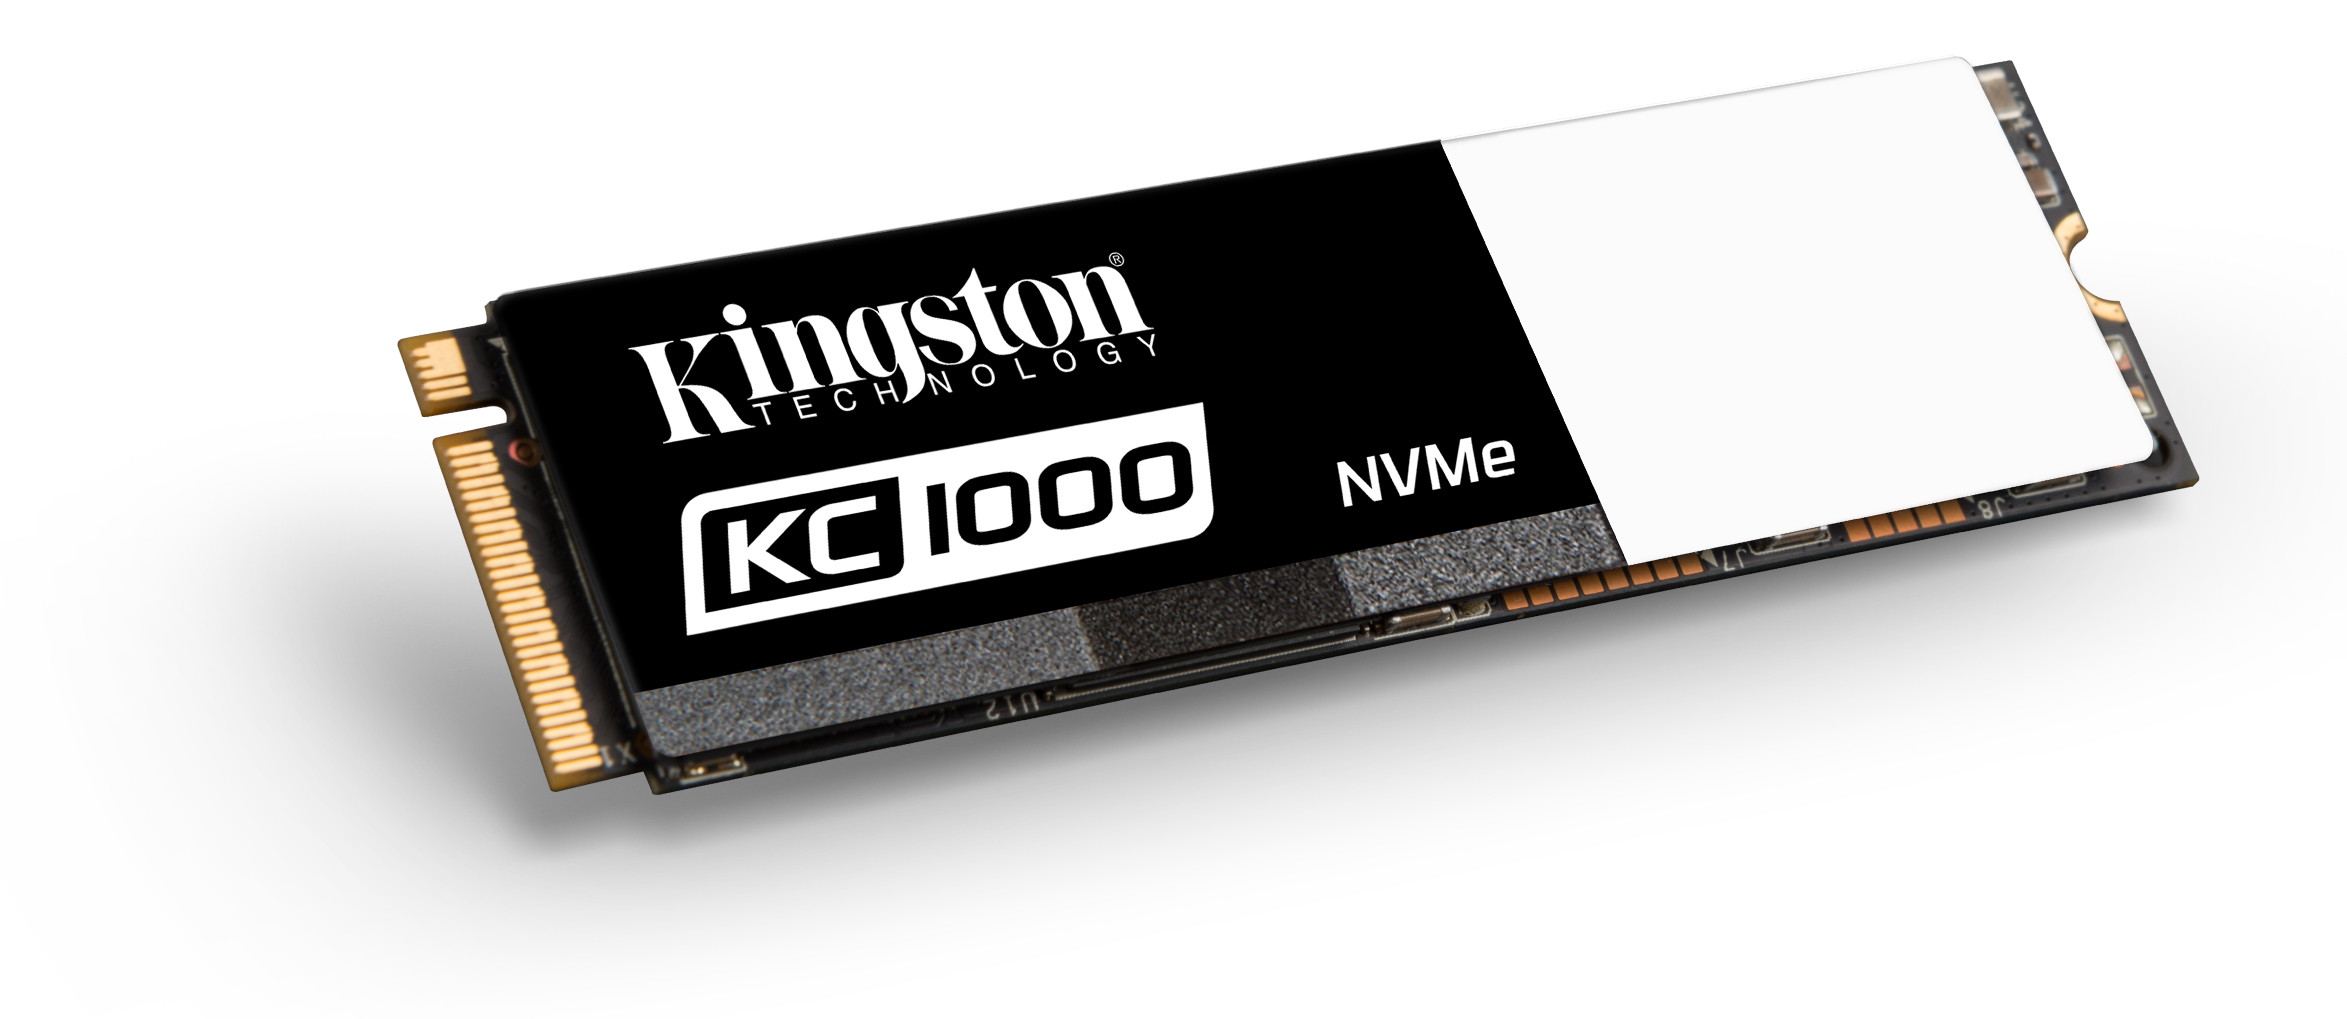 Kingston announced first NVMe SSD, the KC1000